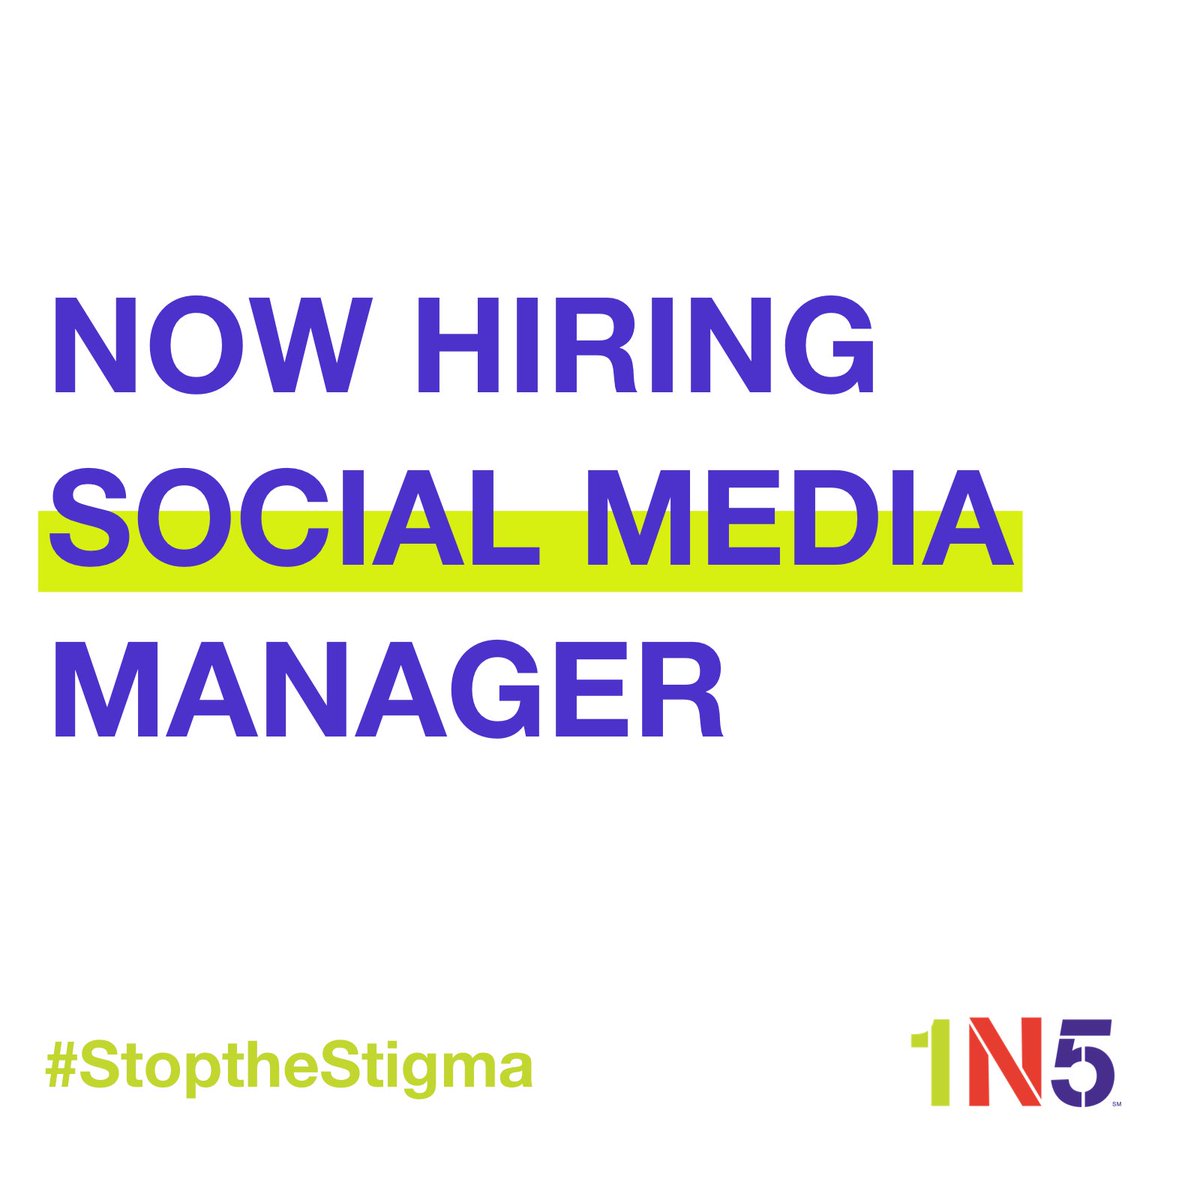 *NOW HIRING* Social Media Manager! Flexible hours! Click the link for details and to apply! 1n5.org/job-posting-so…
#socialmediamarketing #socialmediajob #remotejobs #stopthestigma #mentalwellness #ApplyNow